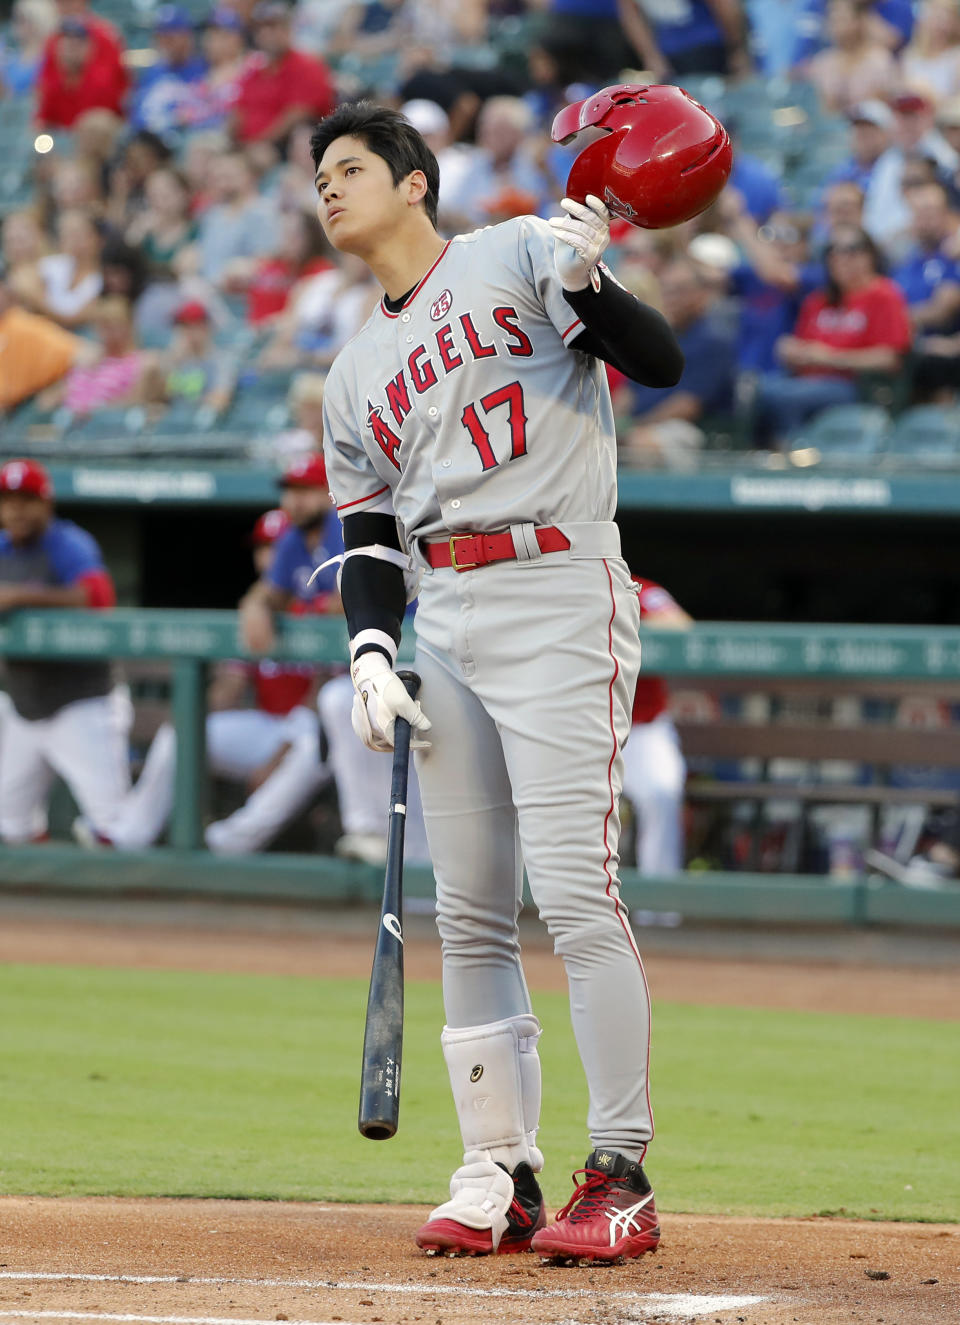 Los Angeles Angels' Shohei Ohtani watches the flight of his foul ball during an at-bat in the first inning of baseball game against the Texas Rangers in Arlington, Texas, Monday, Aug. 19, 2019. (AP Photo/Tony Gutierrez)